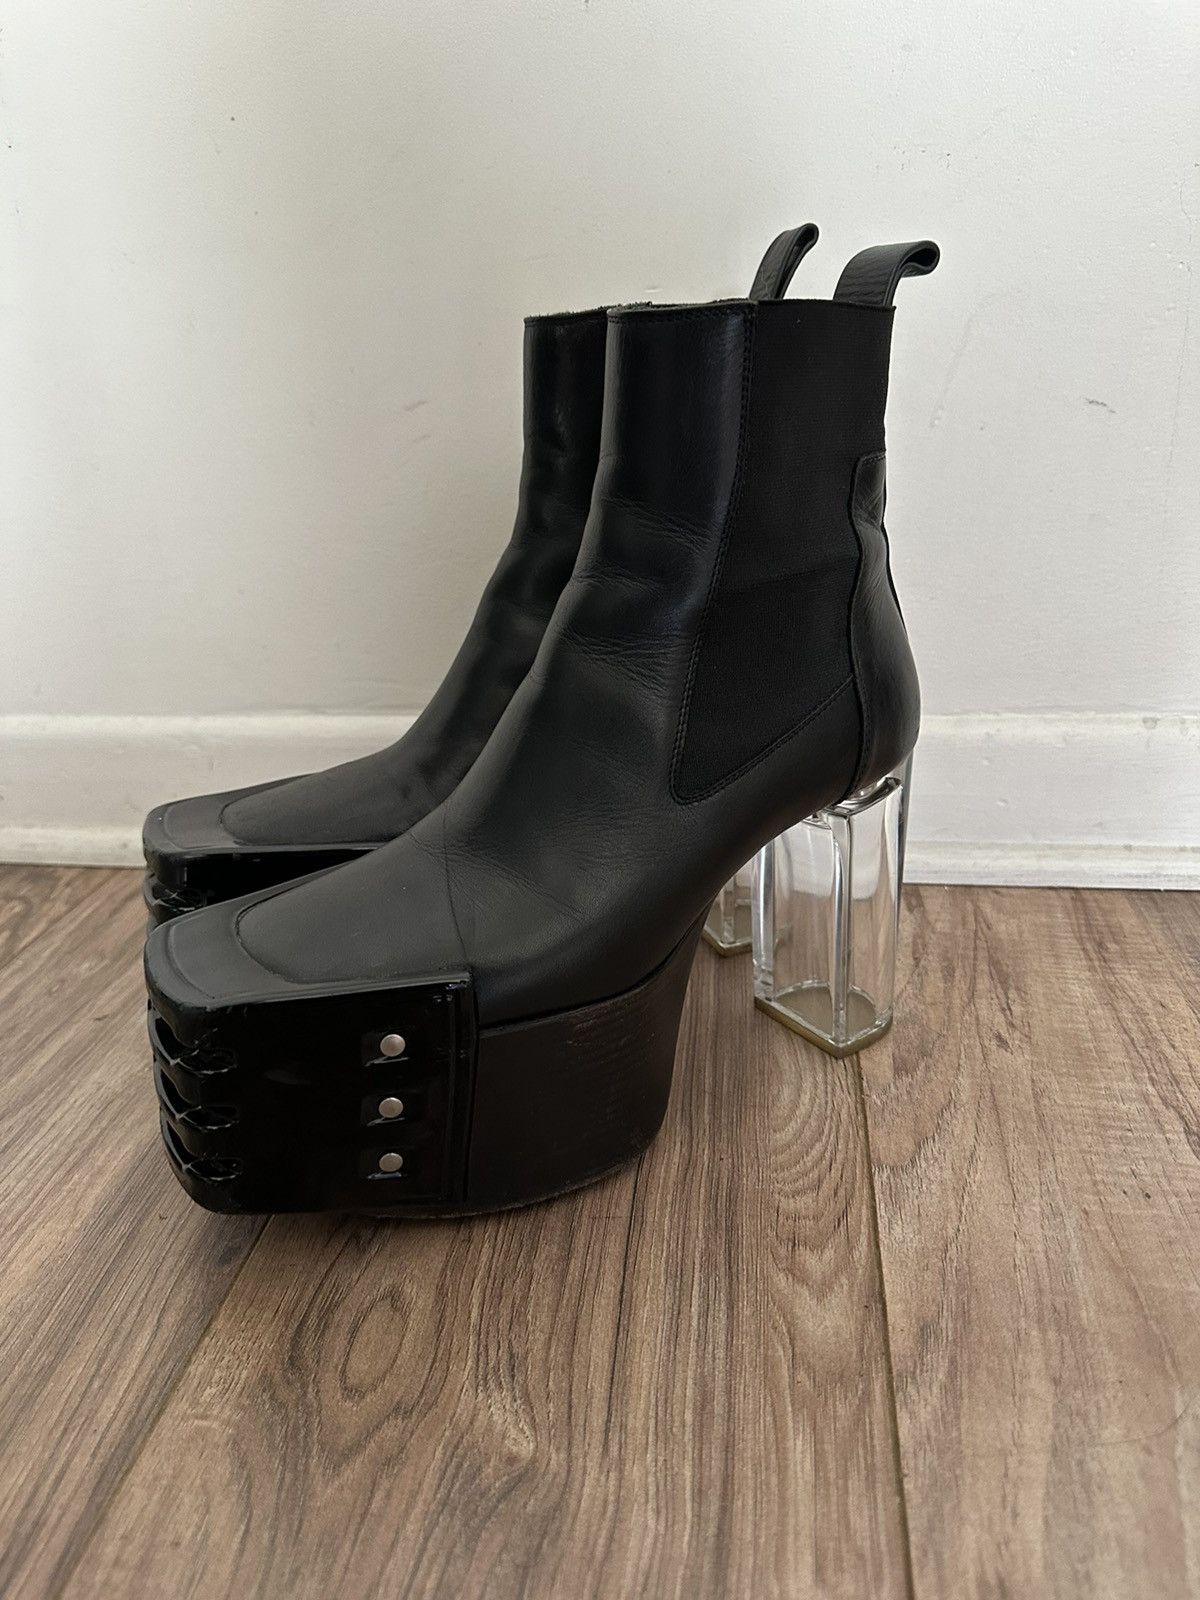 Rick Owens Black Grill Clear Heel Kiss Boots 39 | Grailed